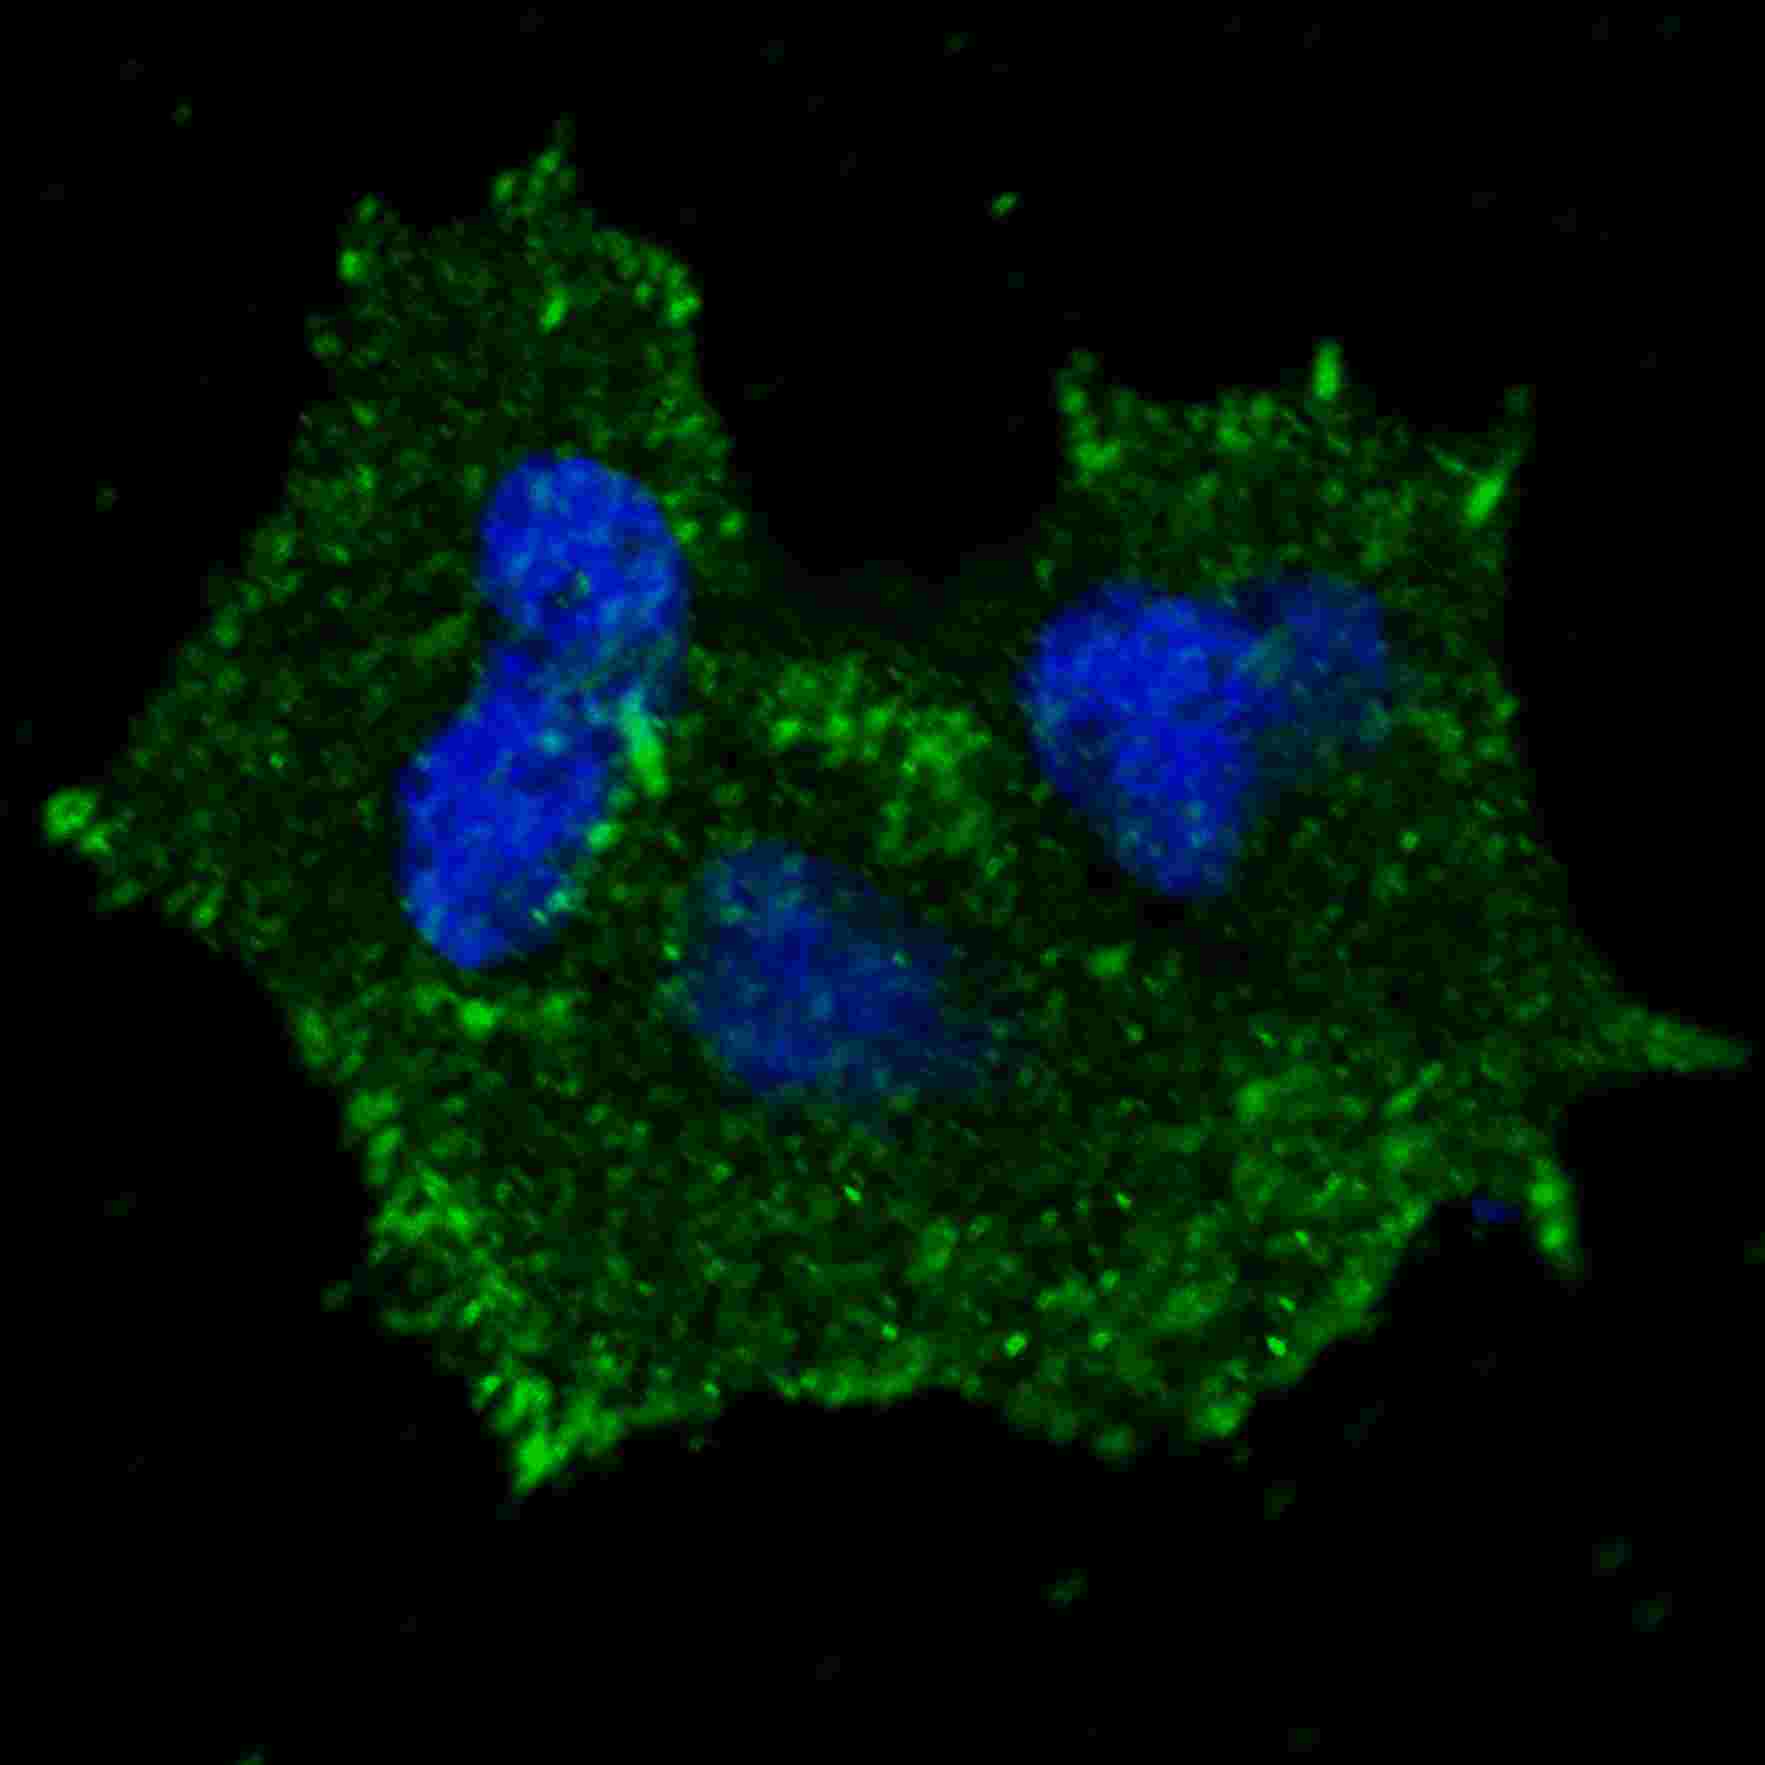 Fluorescent confocal image of MCF7 cells stained with phospho-ERBB2-Y1196 antibody. MCF7 cells were fixed with 4% PFA (20 min), permeabilized with Triton X-100 (0.2%, 30 min).  Cells were then incubated with AP3781t phospho-ERBB2- Y1196 primary antibody (1:100, 2 h at room temperature). For secondary antibody, Alexa Fluor� 488 conjugated donkey anti-rabbit antibody (green) was used (1:1000, 1h). Nuclei were counterstained with Hoechst 33342 (blue) (10 ?g/ml, 5 min). Note the highly specific localization of the phospho-ERBB2-Y1196 to the plasma membrane and cytoplasm. 